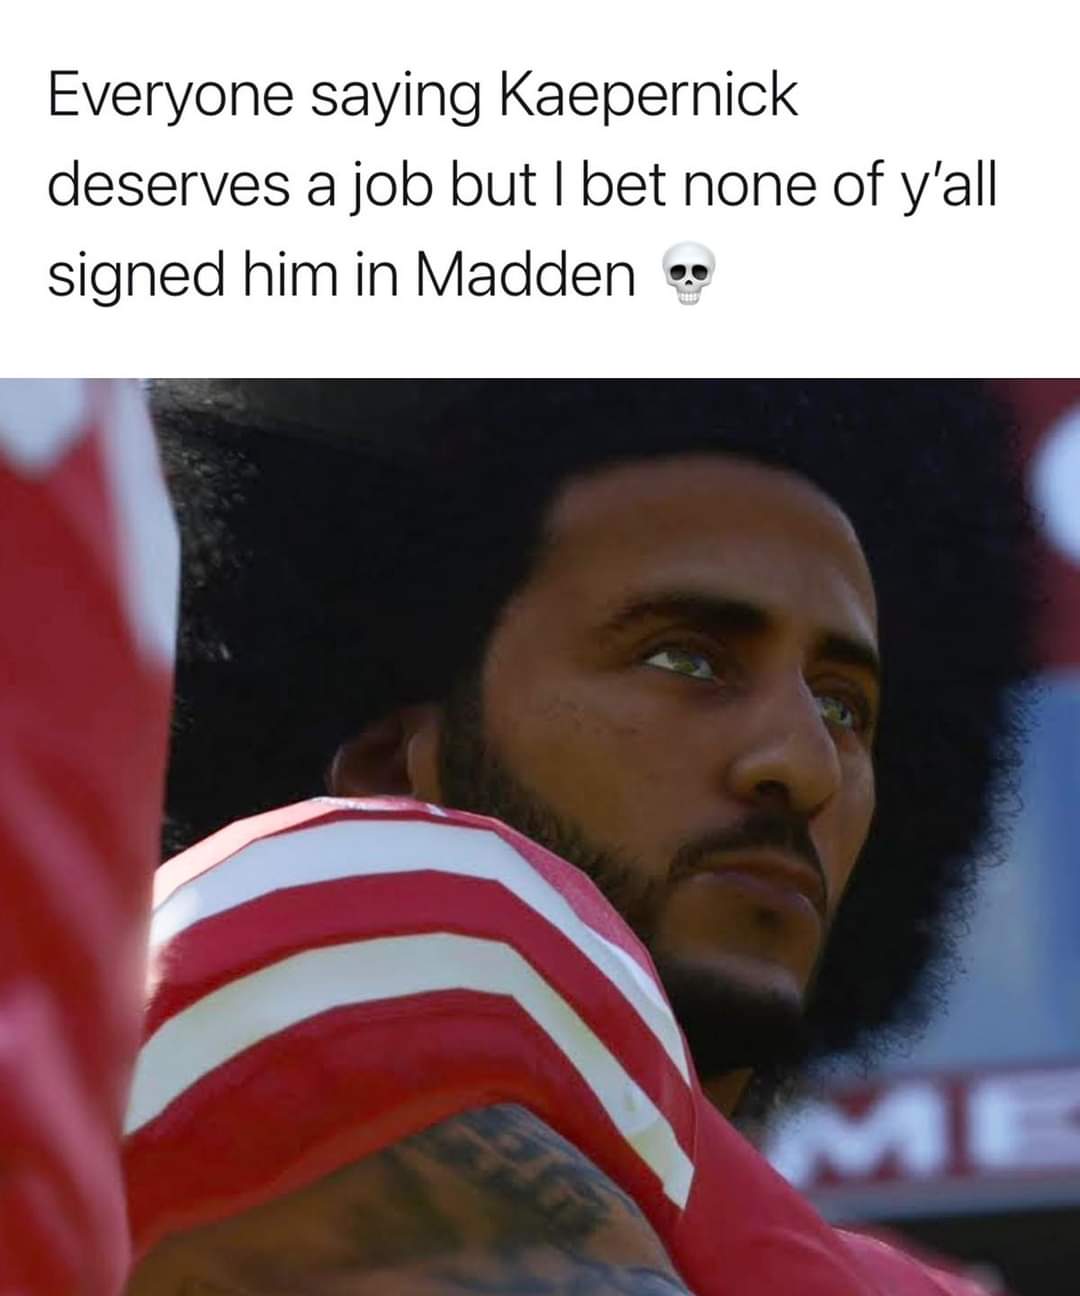 madden 21 colin kaepernick - Everyone saying Kaepernick deserves a job but I bet none of y'all signed him in Madden Me